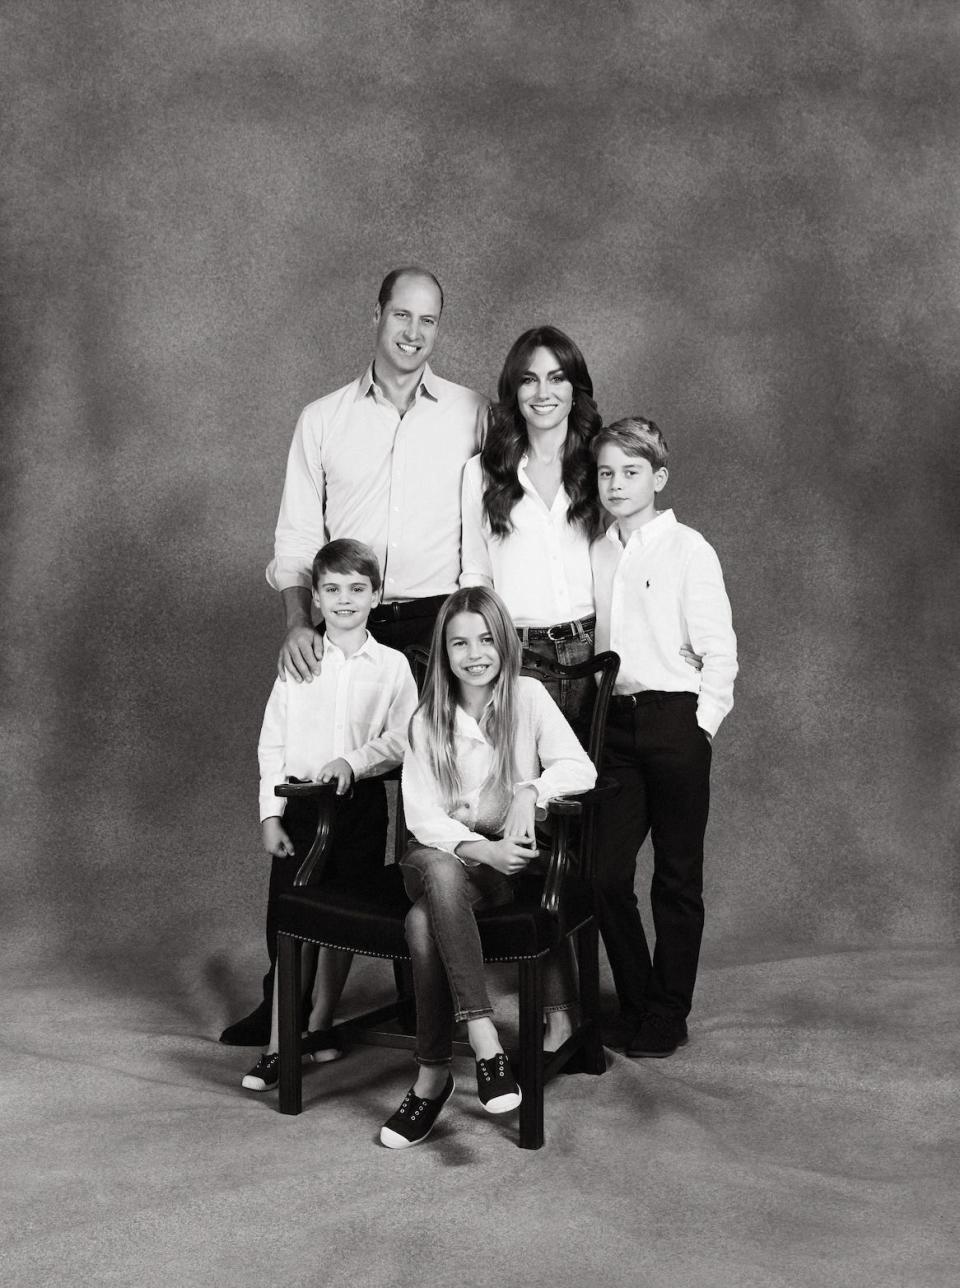 In this undated handout provided by Kensington Palace, and taken by the photographer Josh Shinner earlier this year in Windsor, Prince William, Prince of Wales and Catherine, Princess of Wales pose with their three children Prince George, Princess Charlotte and Prince Louis.